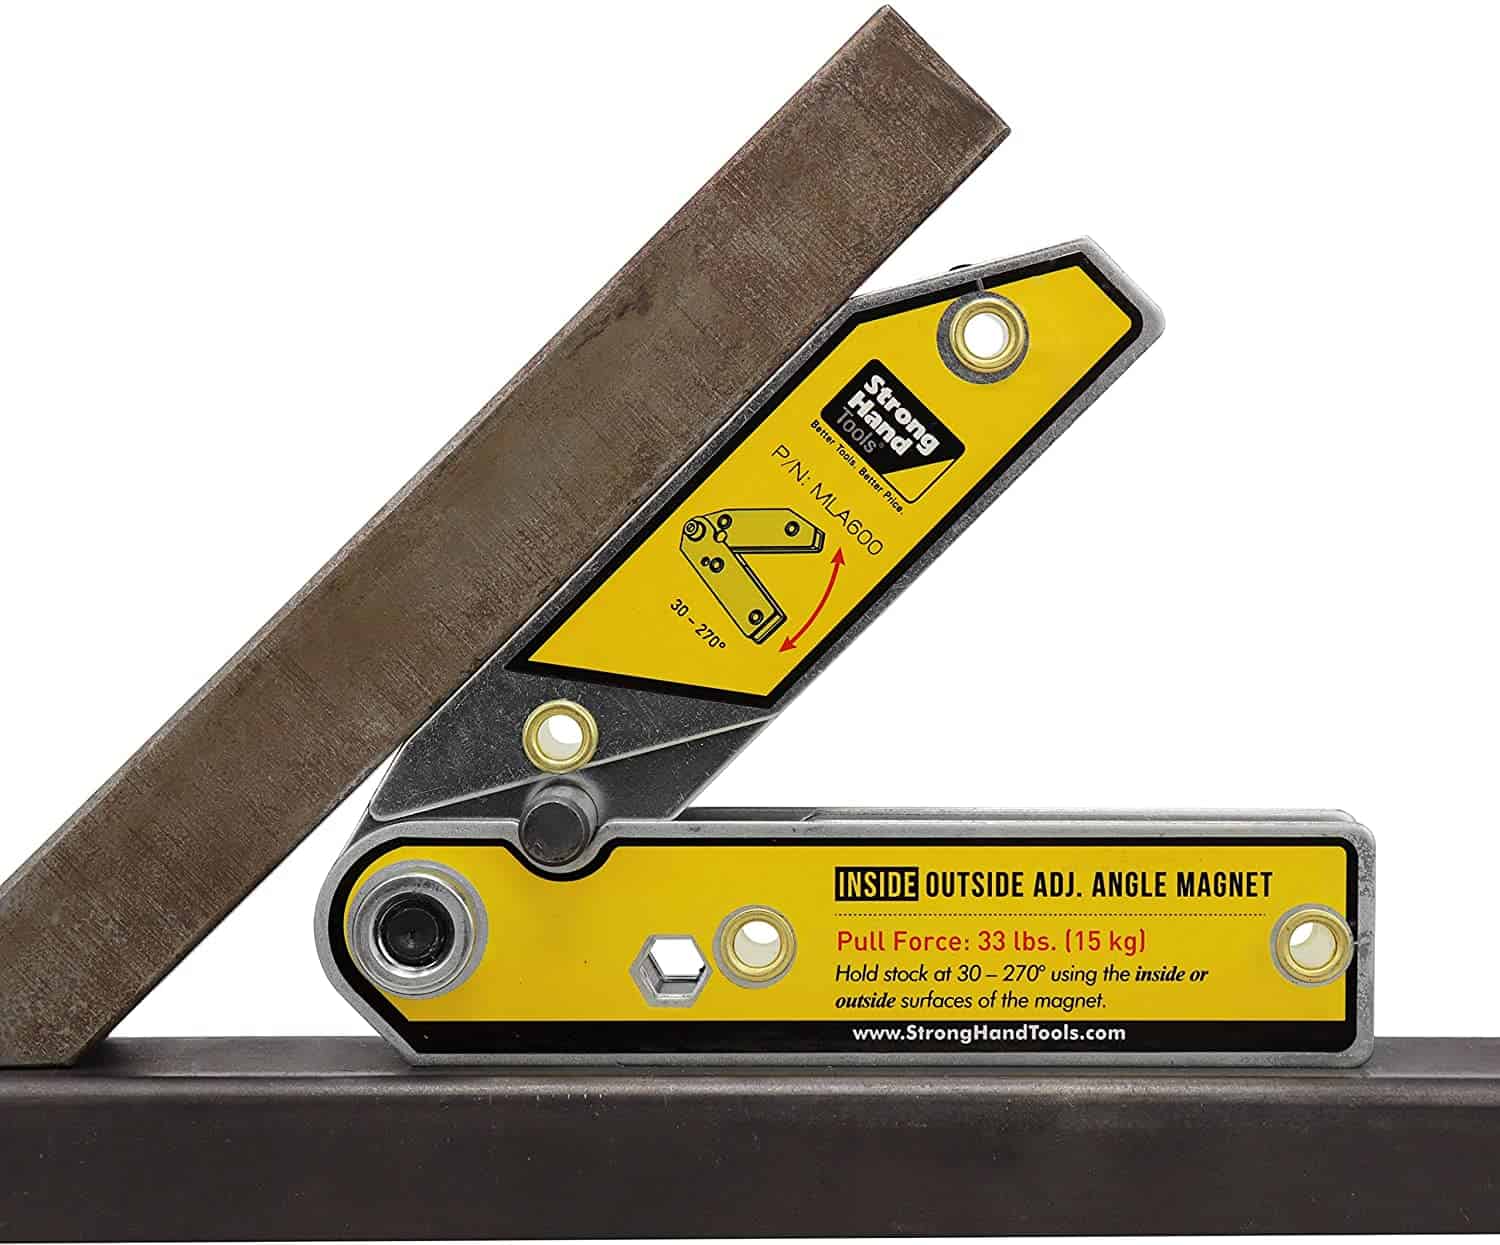 Best adjustable angle welding magnet- Strong Hand Tools Angle Magnetic Square in use